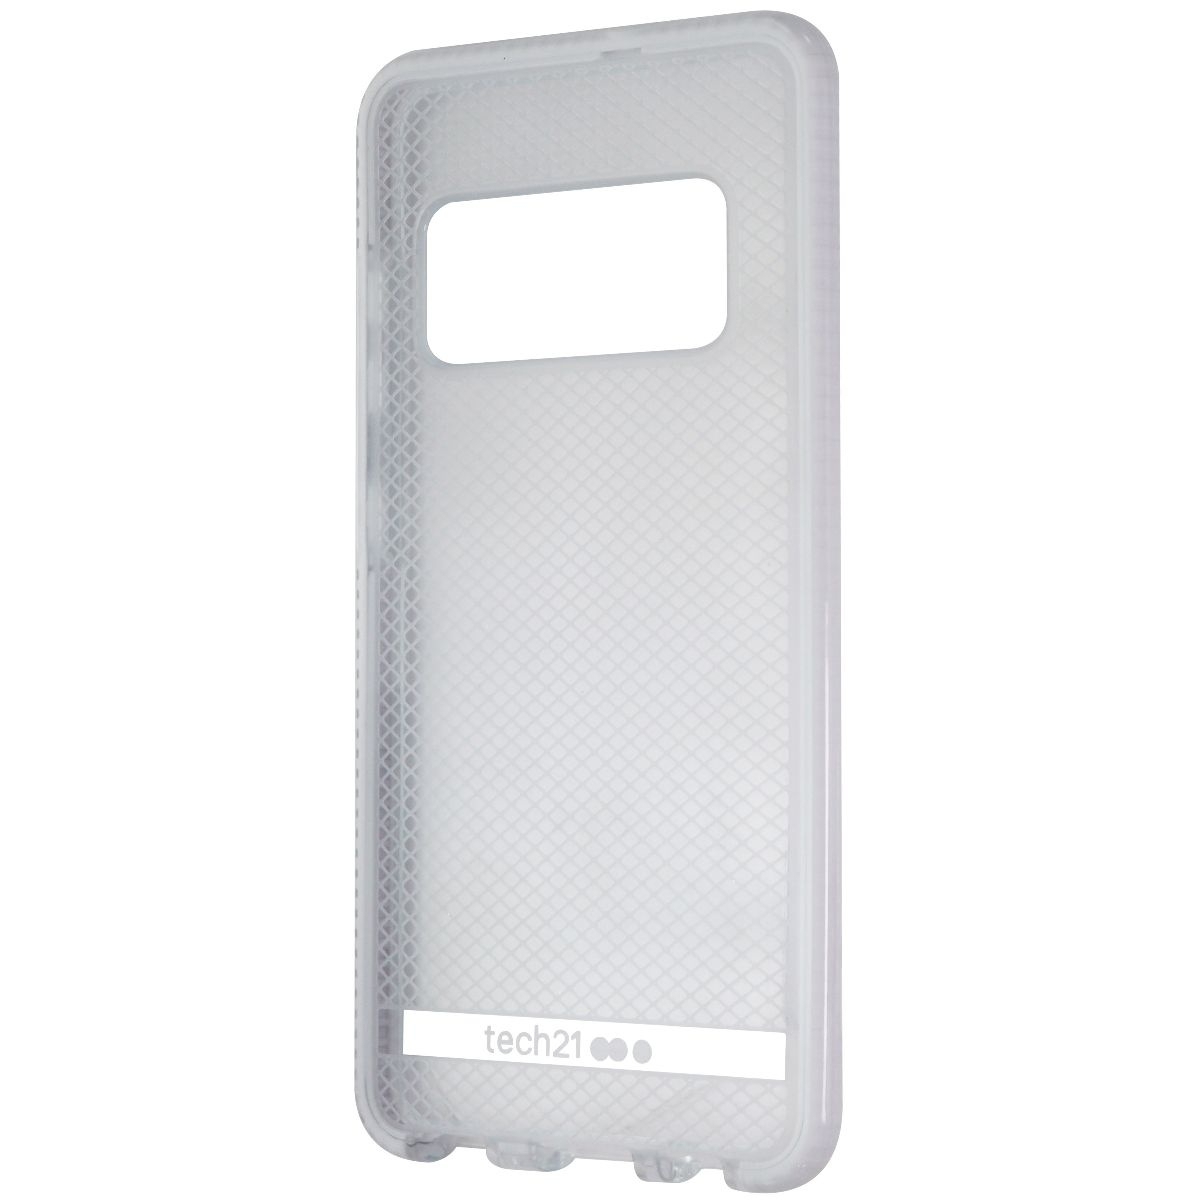 Tech21 Evo Check Series Protective Case Cover For Asus Zenfone AR - Clear White